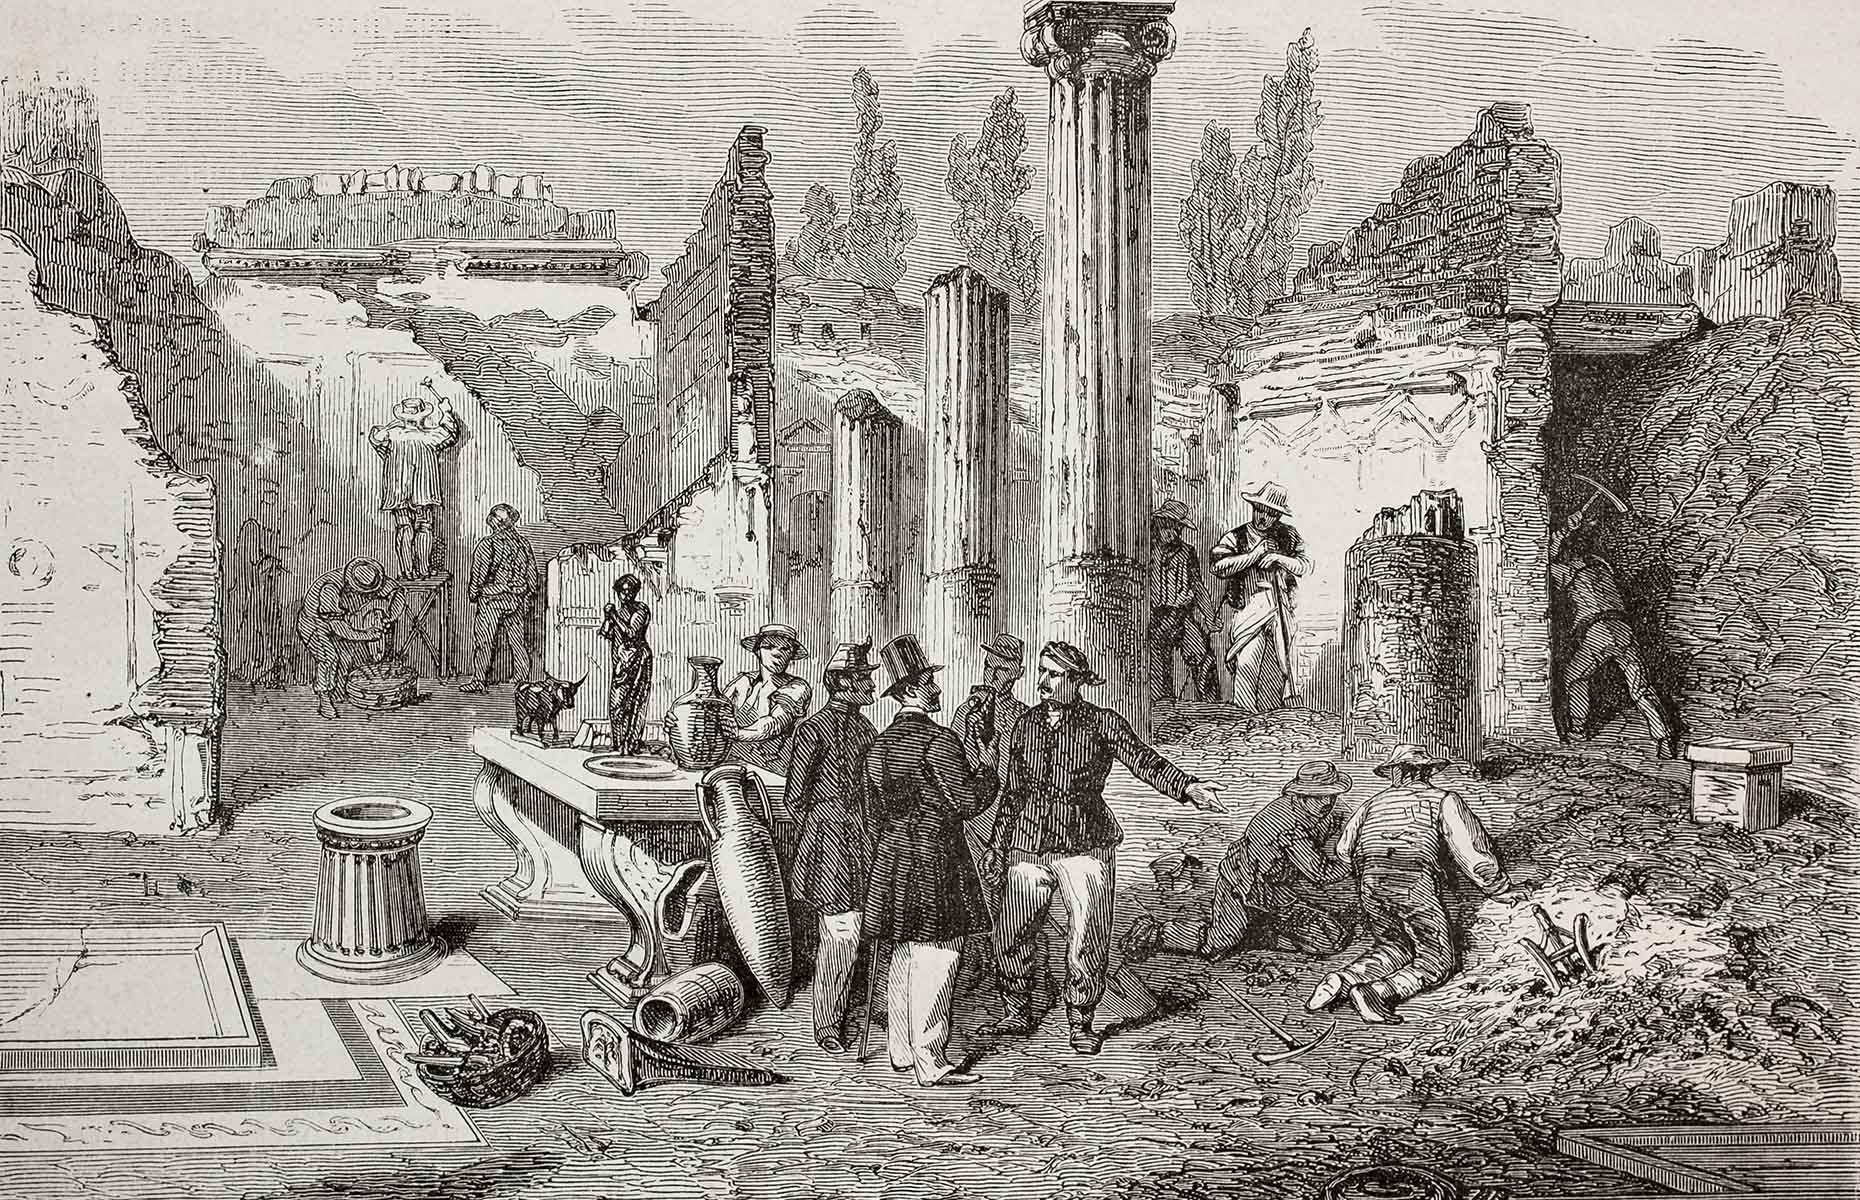 <p>Much of what we know about Pompeii is thanks to the efforts of Italian archaeologist Giuseppe Fiorelli, who took over the site in the 19th century and developed pioneering new techniques. In his early 20s, he challenged the establishment by dividing the site into different regions – a more rigorous method of study – and excavating in a way that reduced potential damage.</p>  <p>He wasn’t without controversy though: during a time of political turmoil in Italy, he was caught up in the nationalist movement and imprisoned in 1849 – though some say he was only reported by rival archaeologists.</p>